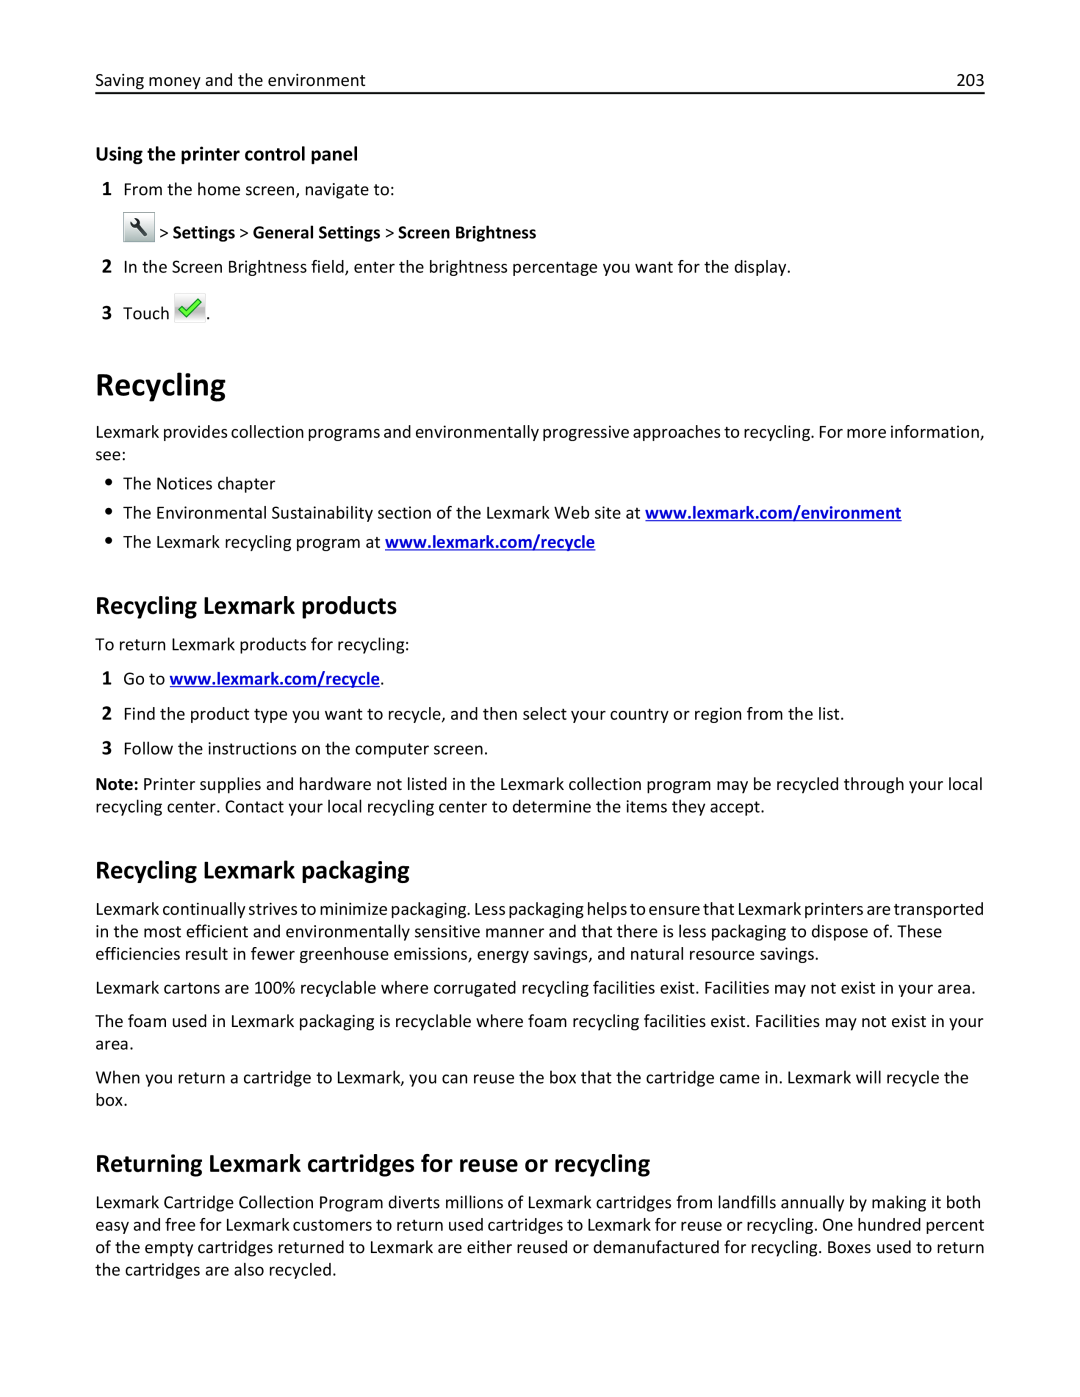 Lexmark 436 manual Recycling Lexmark products, Recycling Lexmark packaging, Using the printer control panel 